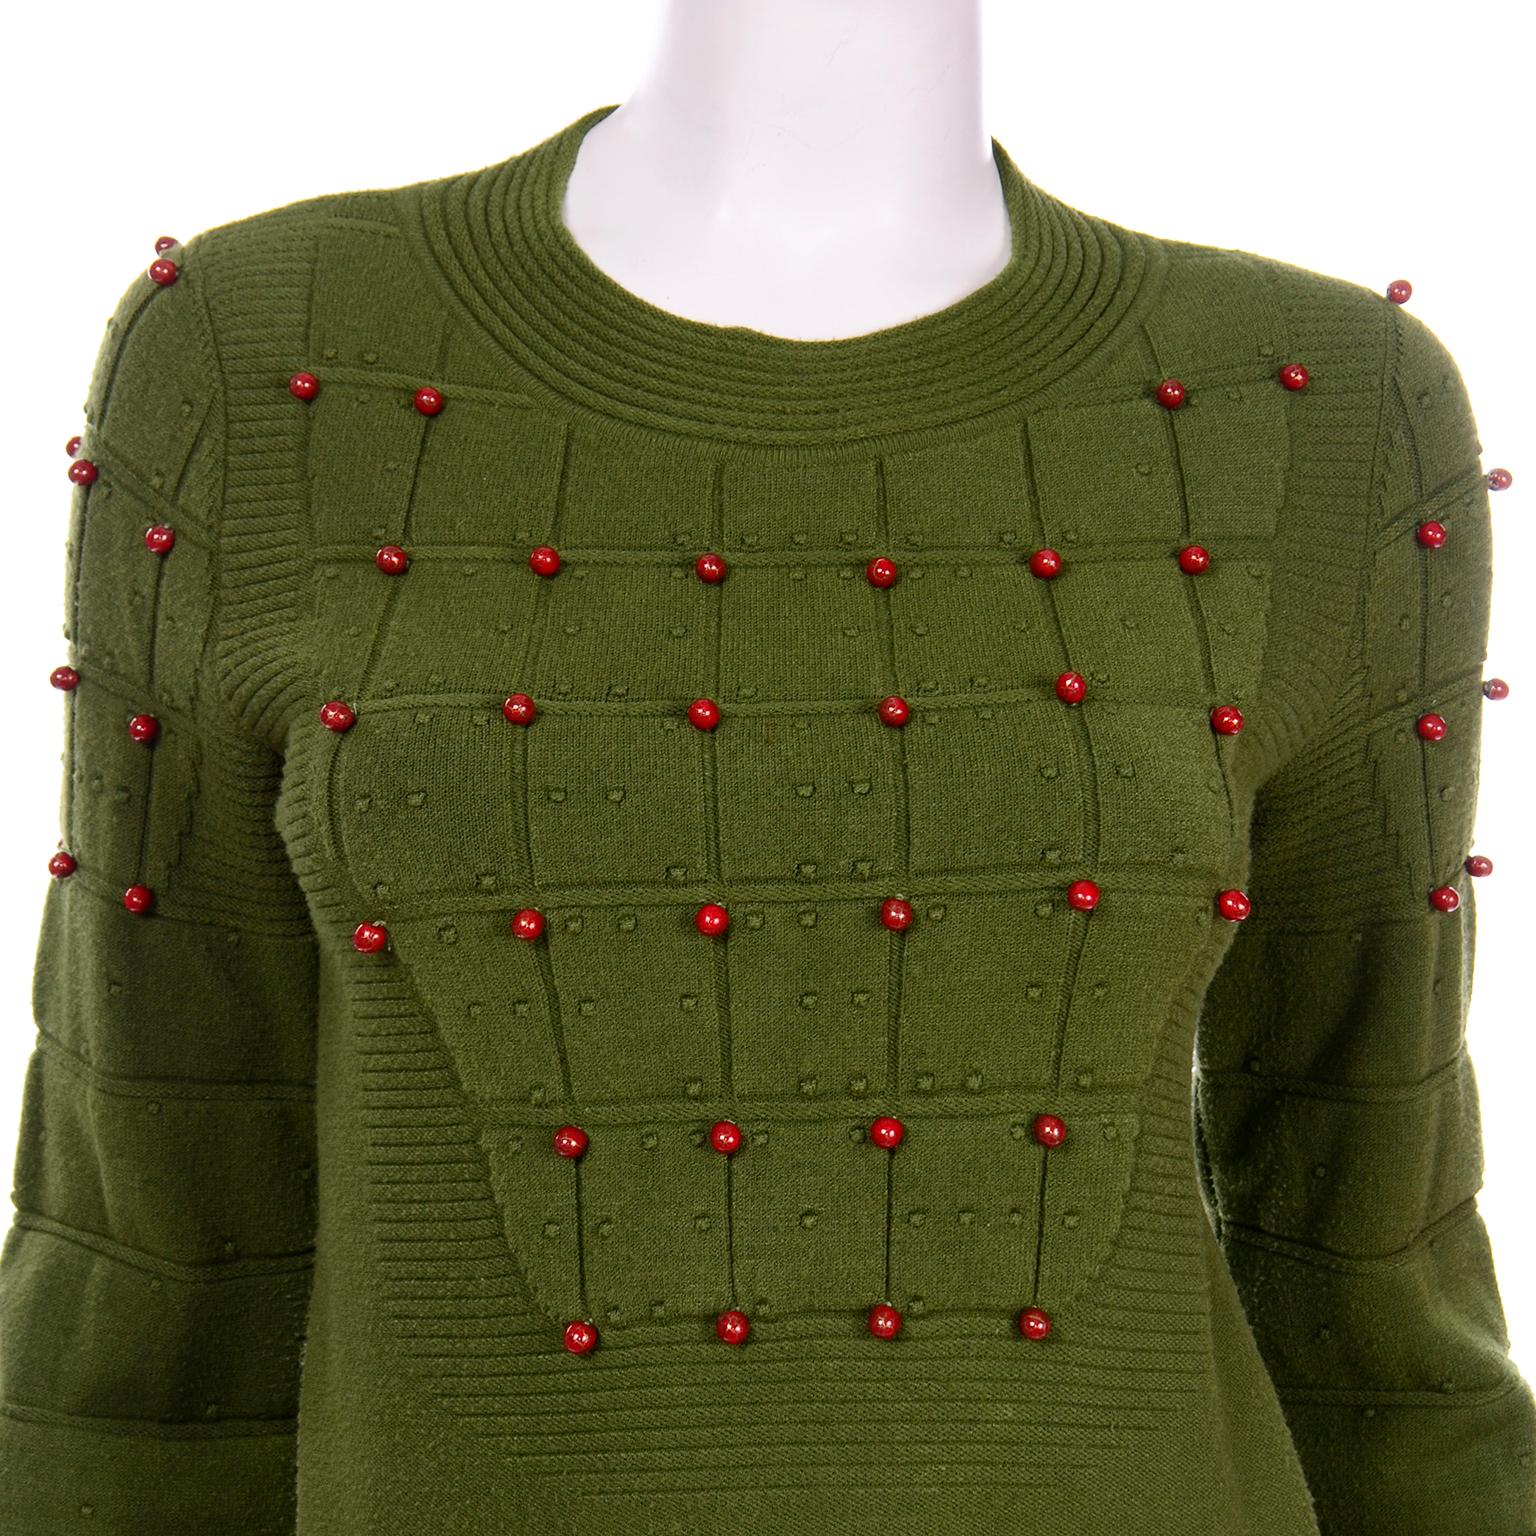 Chanel Cashmere Blend Textured Beaded Green Pullover 2010 Runway Sweater  In Excellent Condition For Sale In Portland, OR